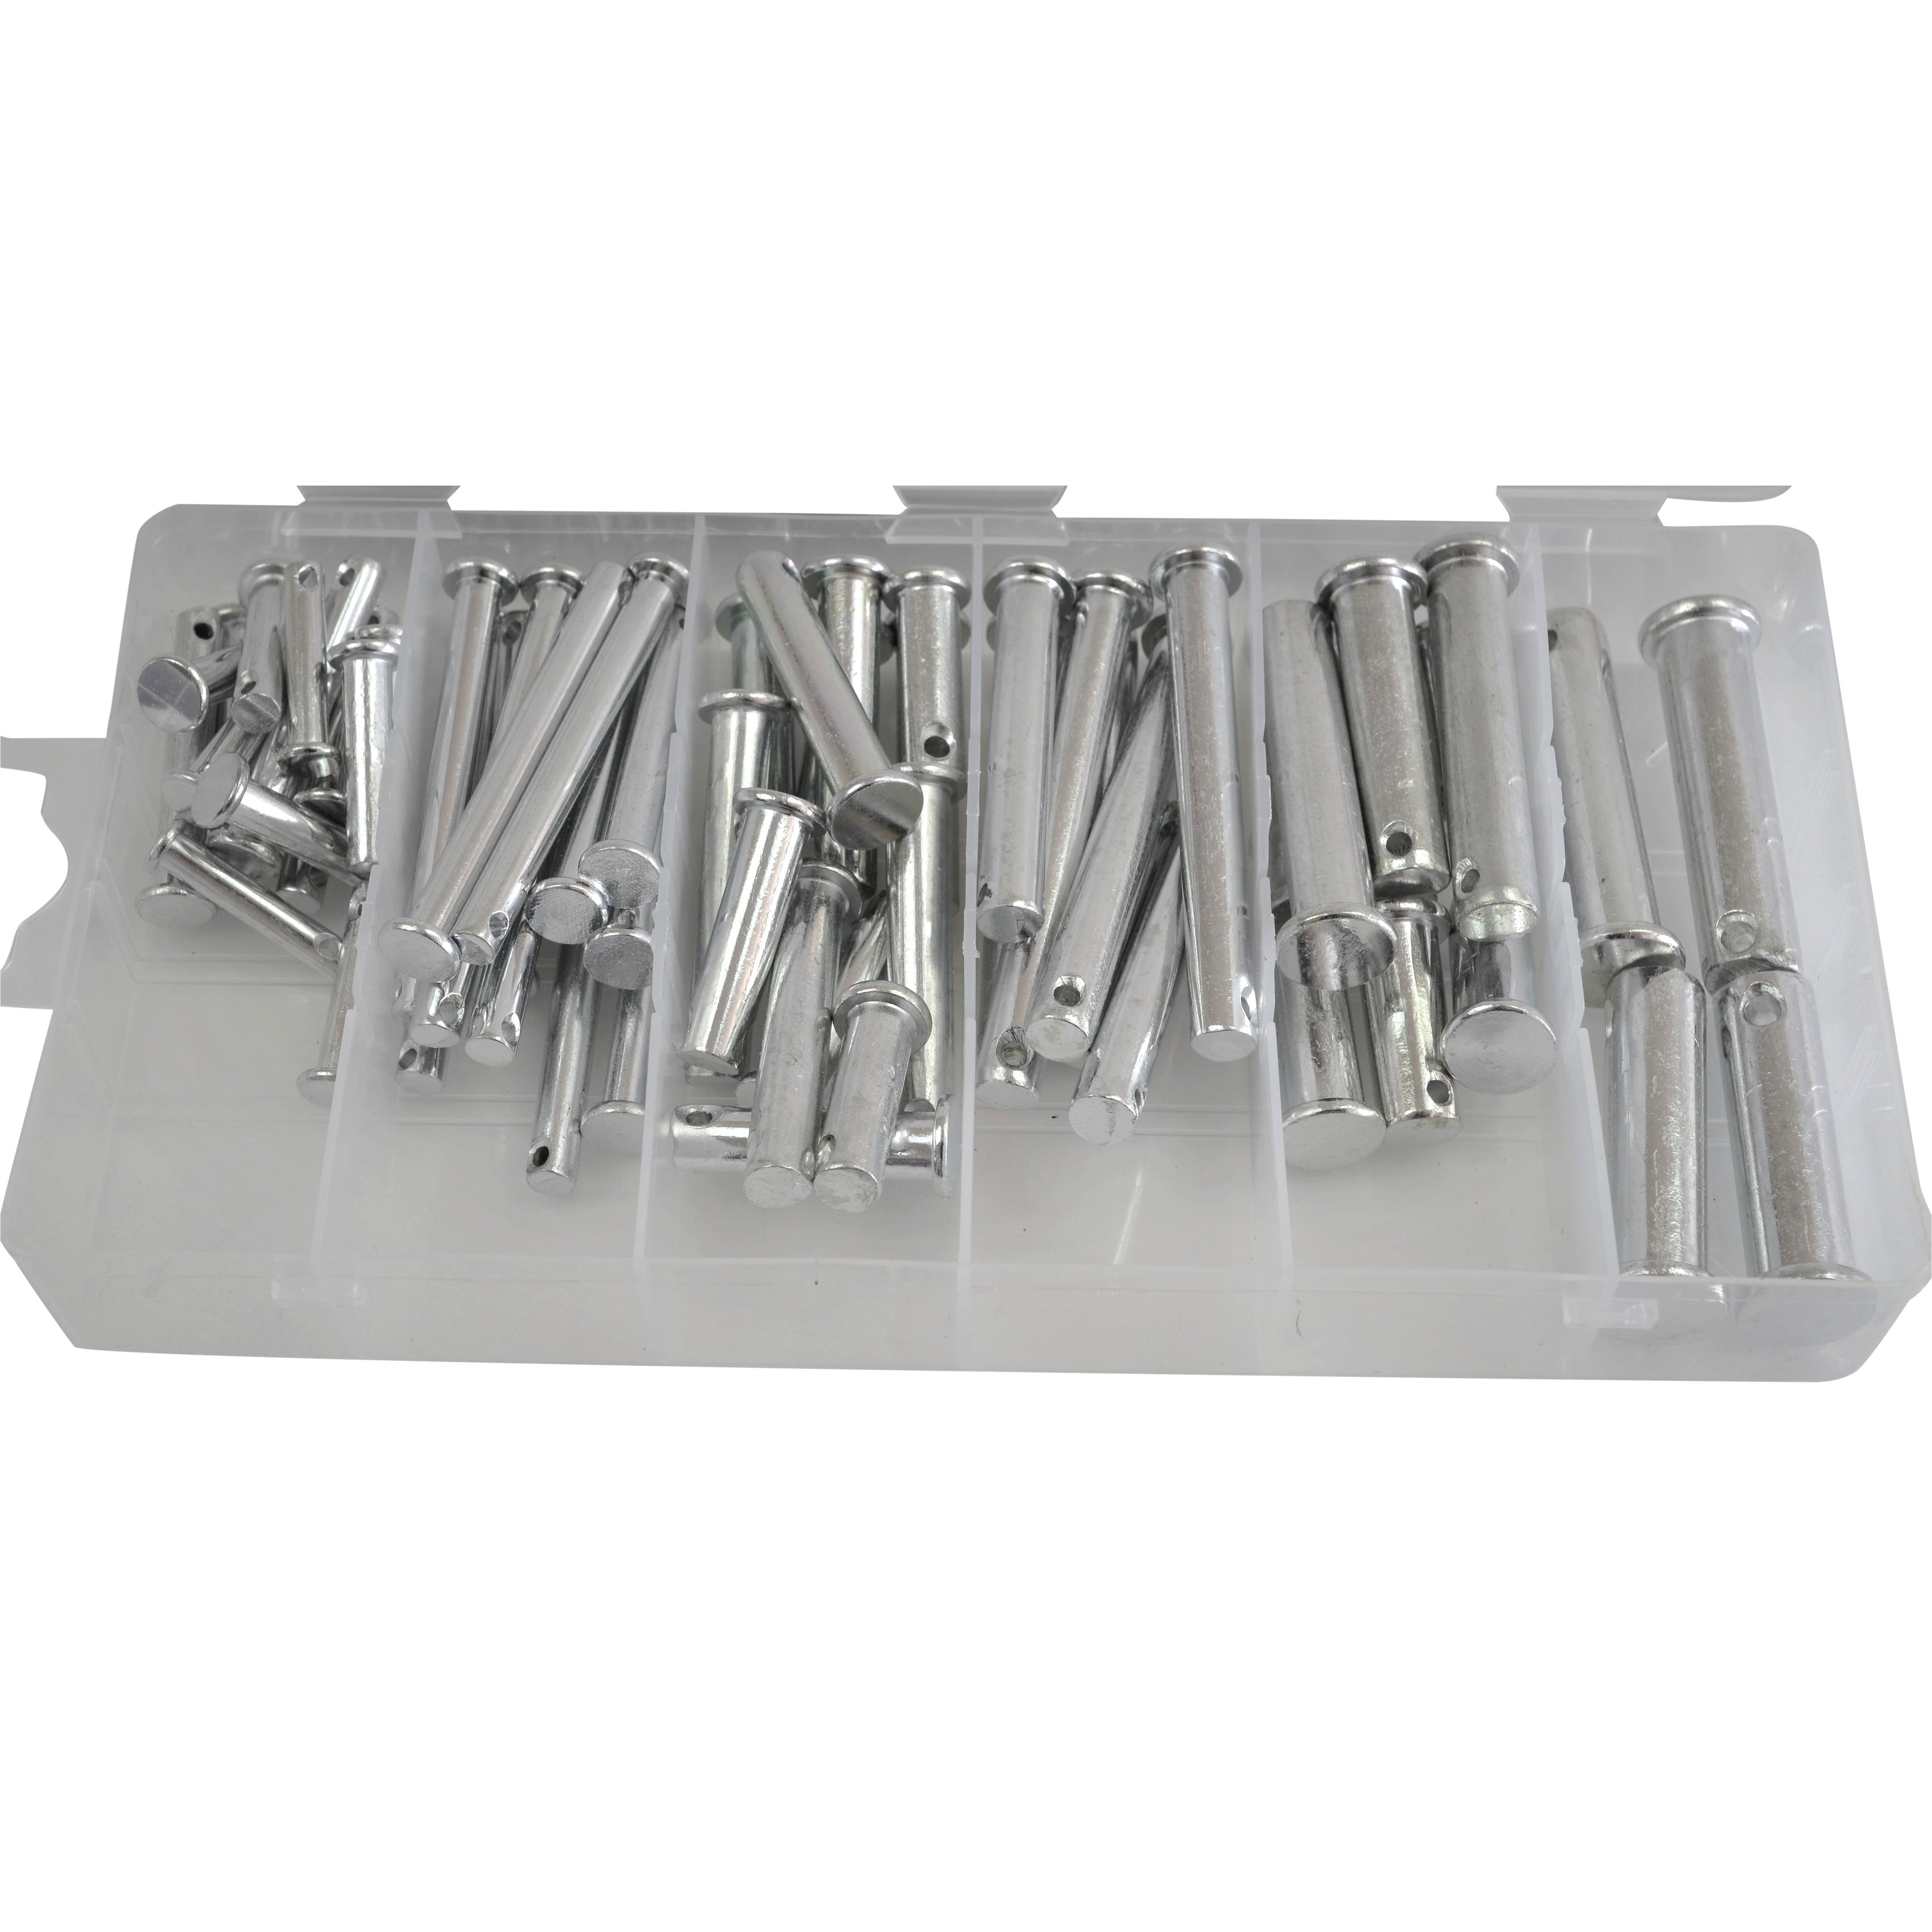 Clevis Pin 60 Piece Metric Grab Kit Assortment Twin Eagle Imports 